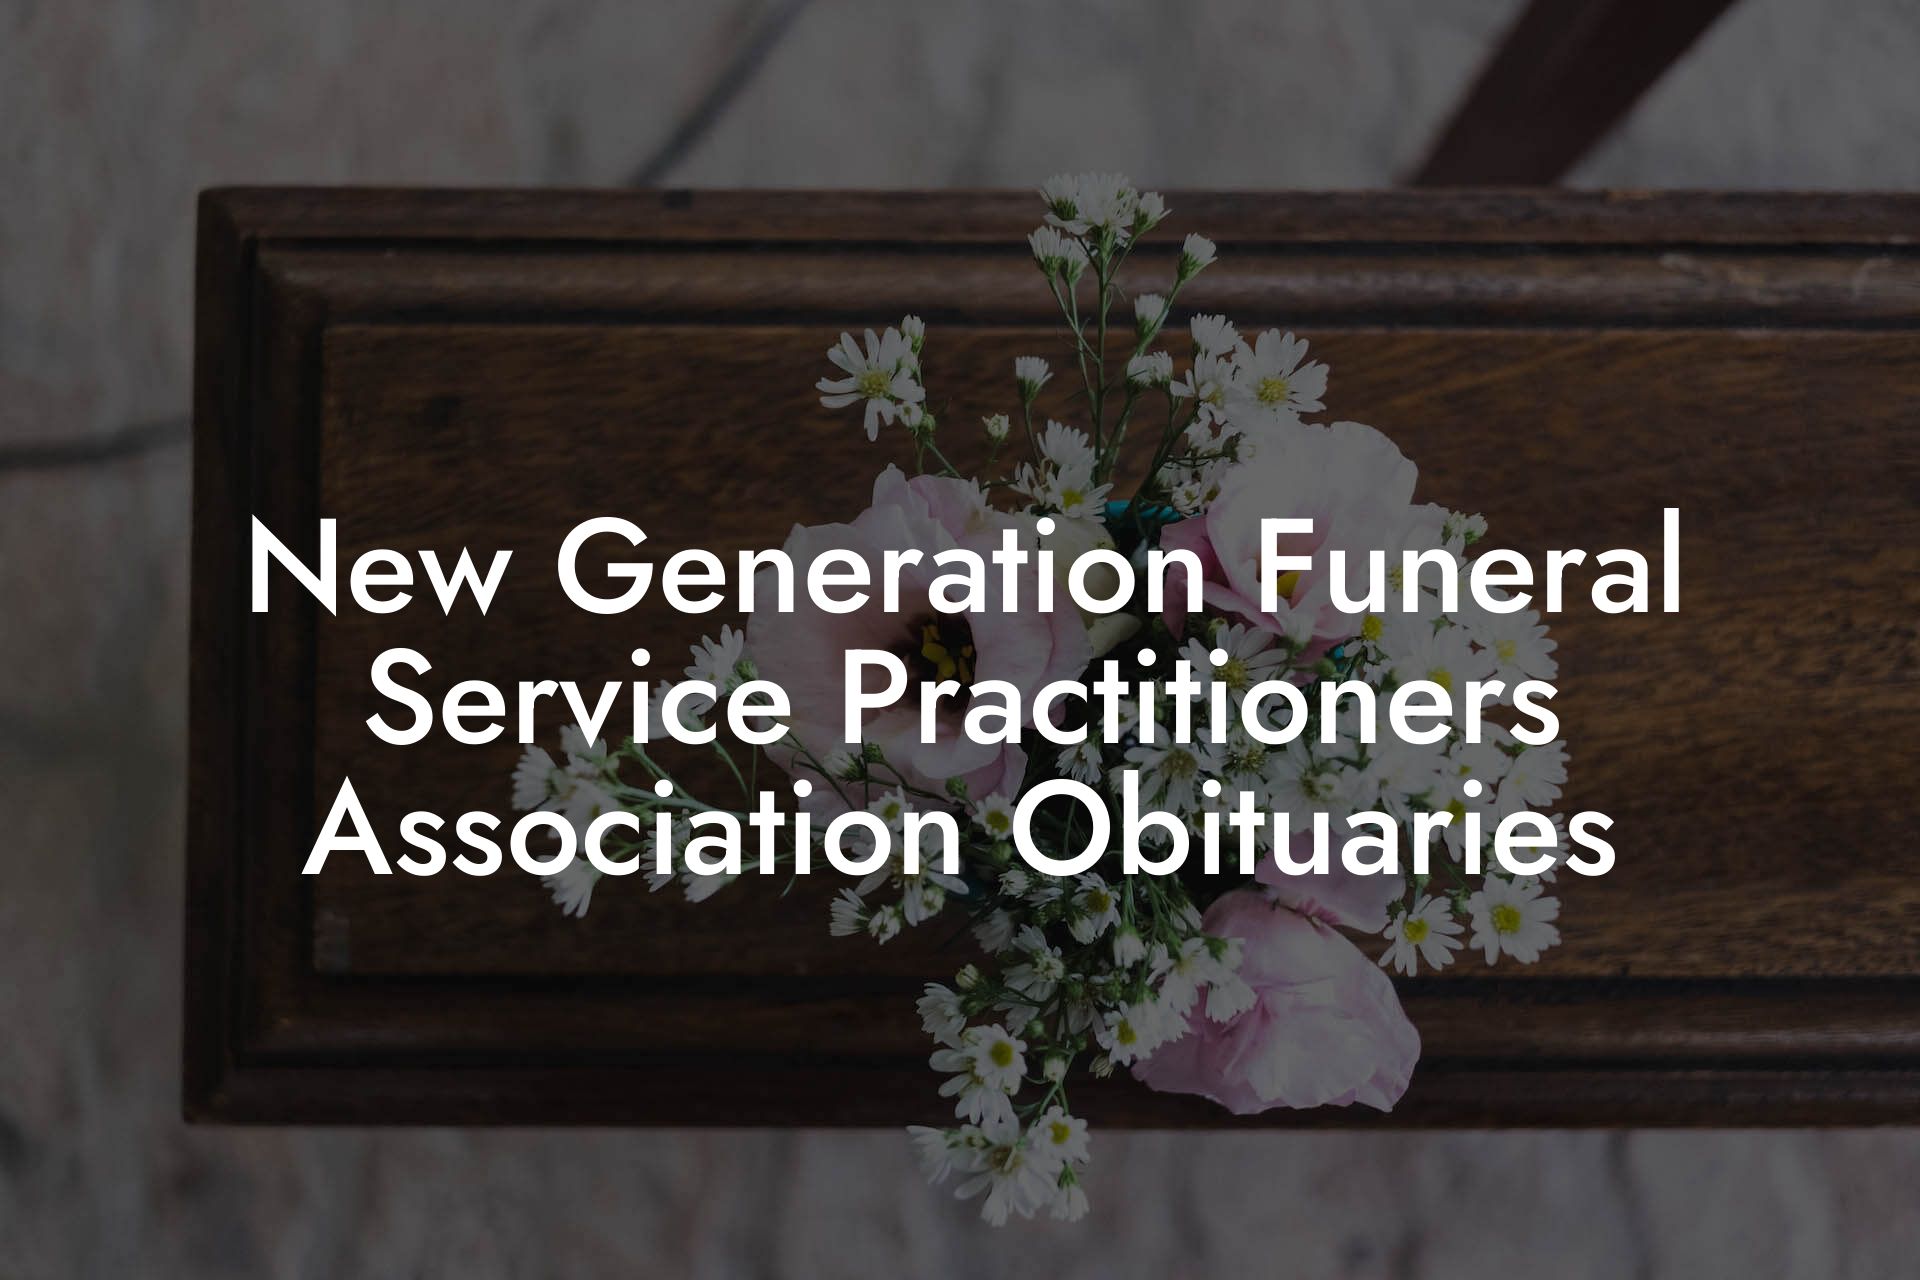 New Generation Funeral Service Practitioners Association Obituaries